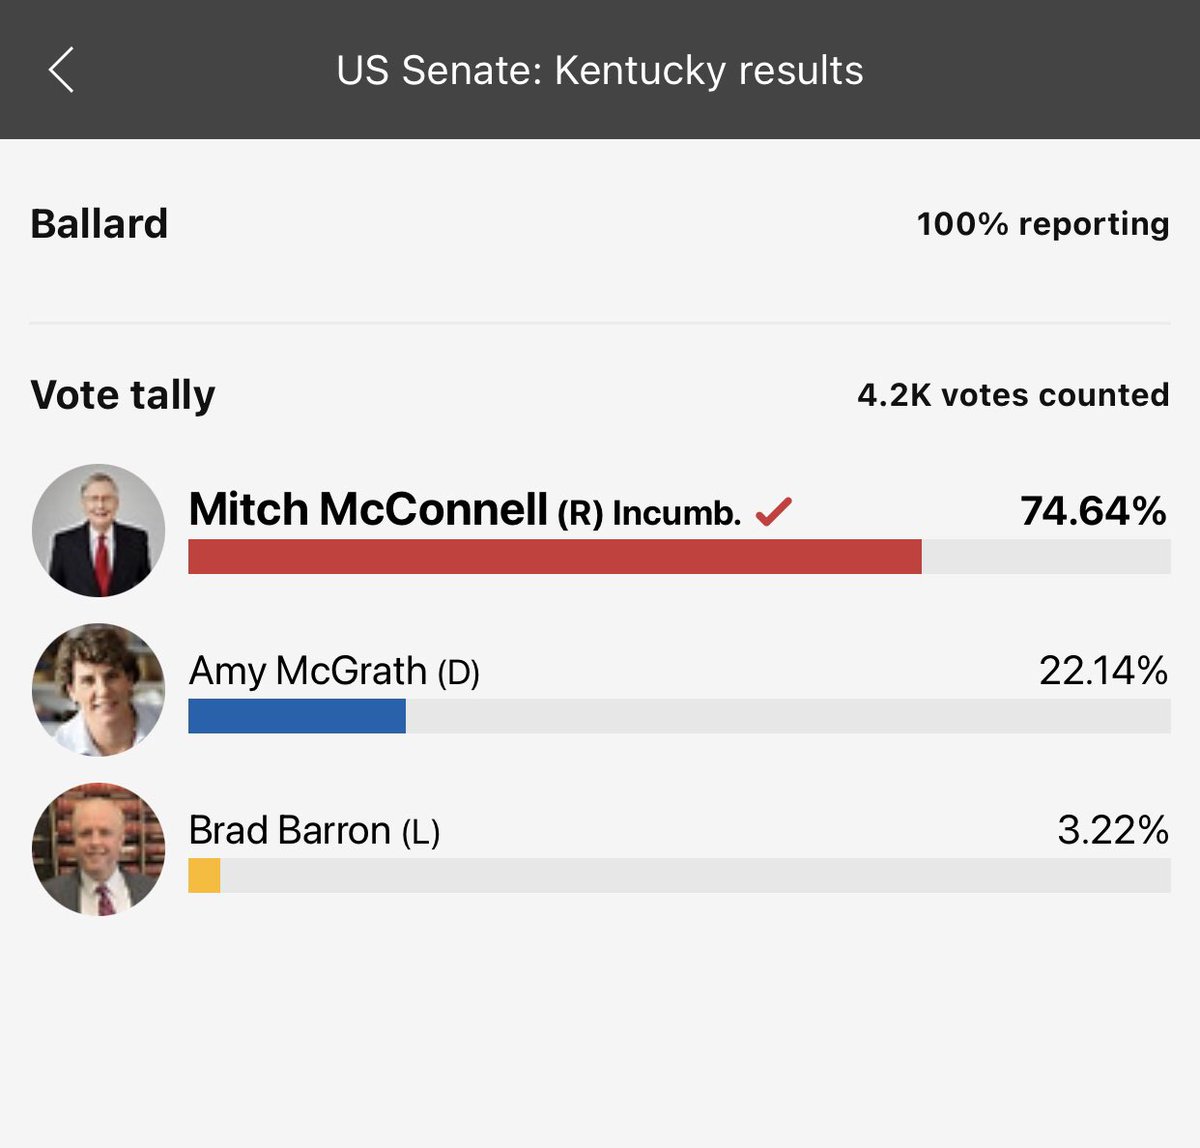 KENTUCKY NEEDS TO BE INVESTIGATED BALLARD - McConnell won by 74.64% of 4.2k votes - that’s roughly 3,134 people. Ballard county has 2,285 registered republicans as of 10/10/2020 @AmyMcGrathKY  @marceelias  #VoterSuppression 1/4